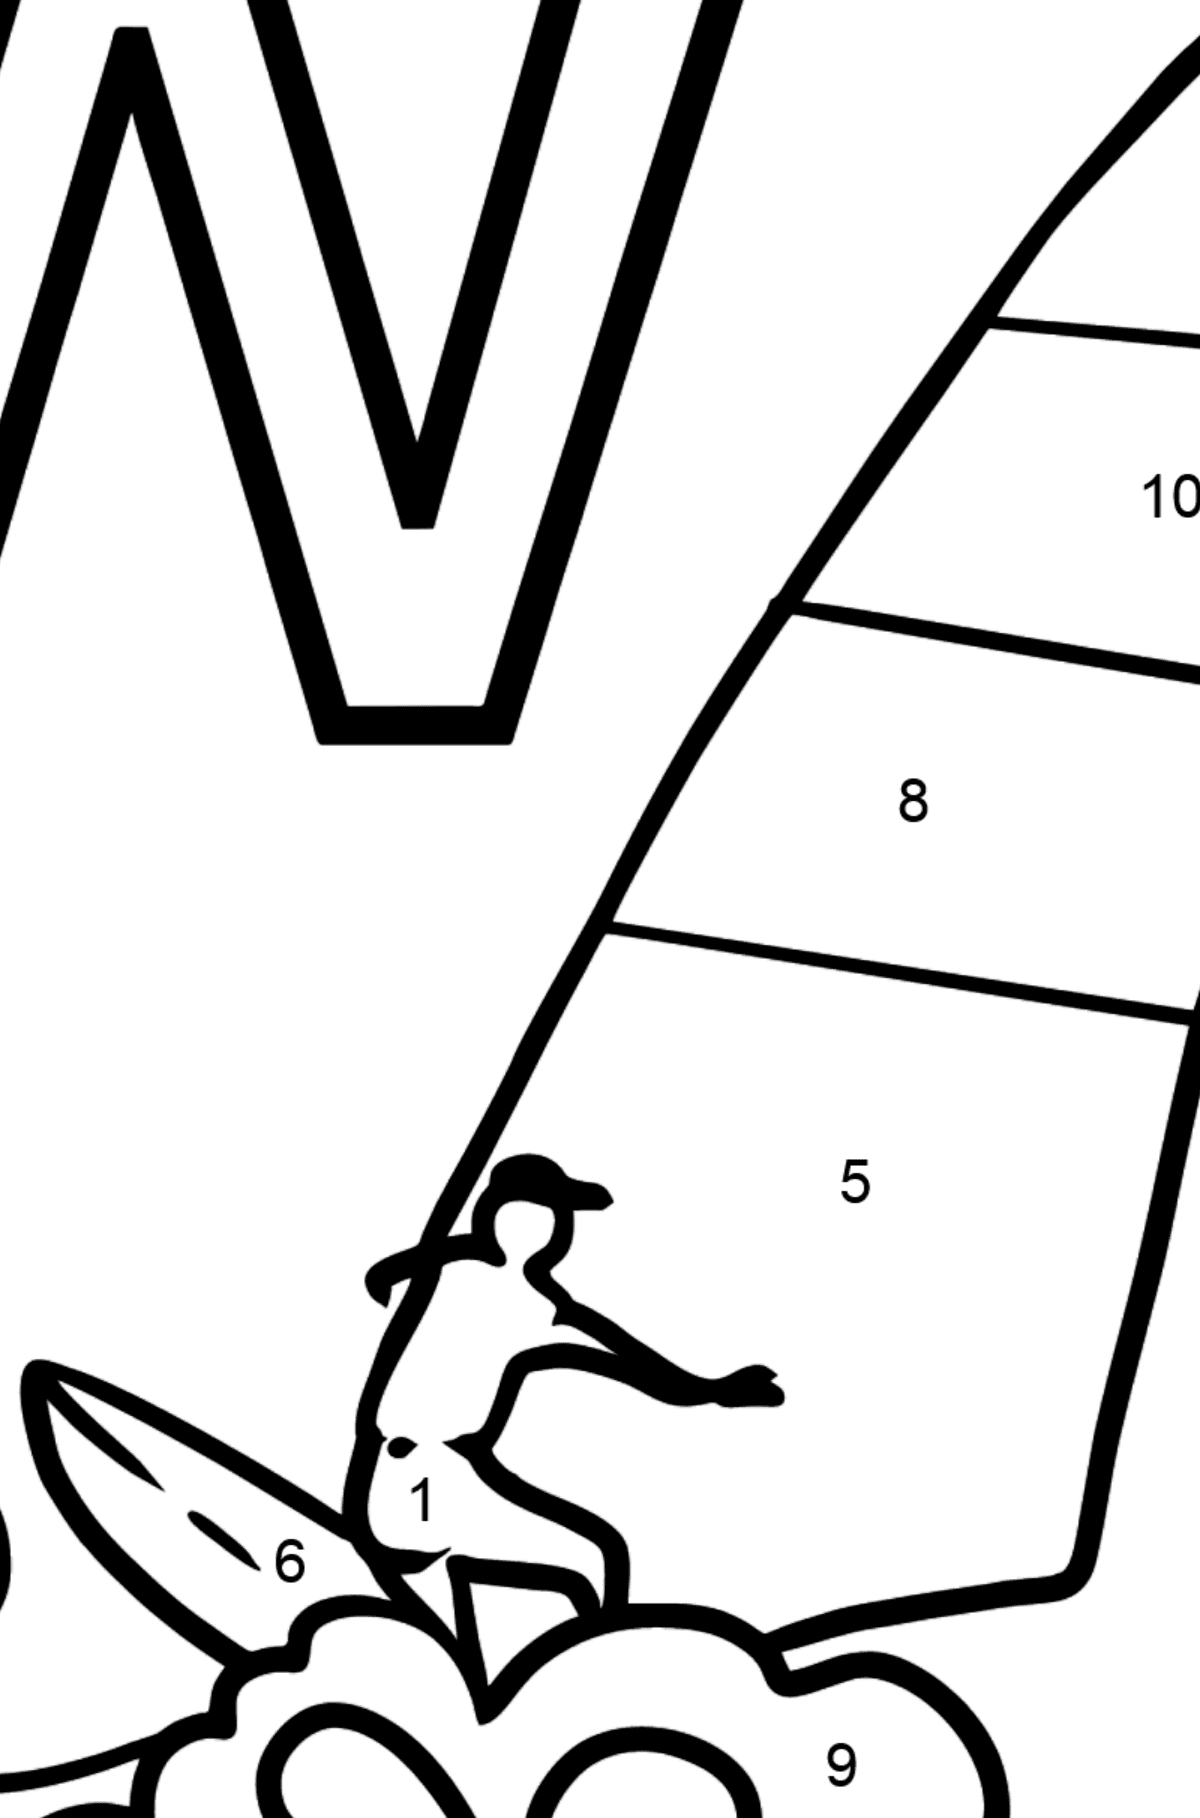 Spanish Letter W coloring pages - WINDSURF - Coloring by Numbers for Kids